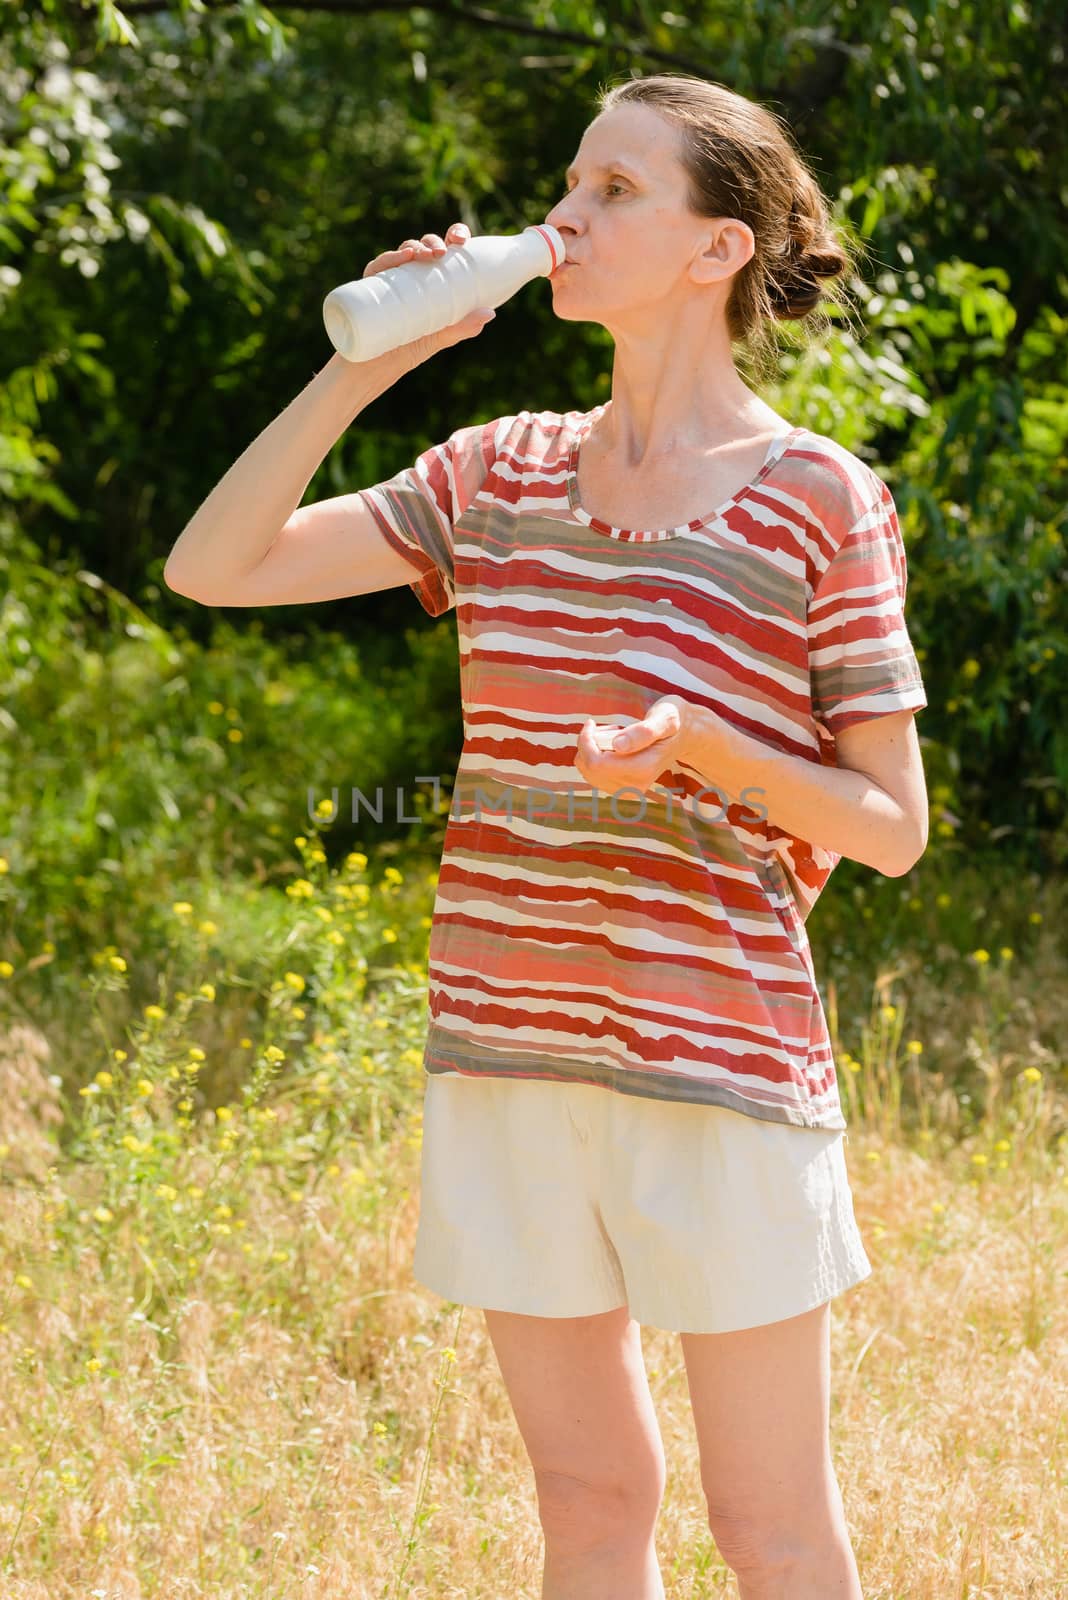 A senior woman is drinking water or yogurth to quench her thirst after a long run in the forest